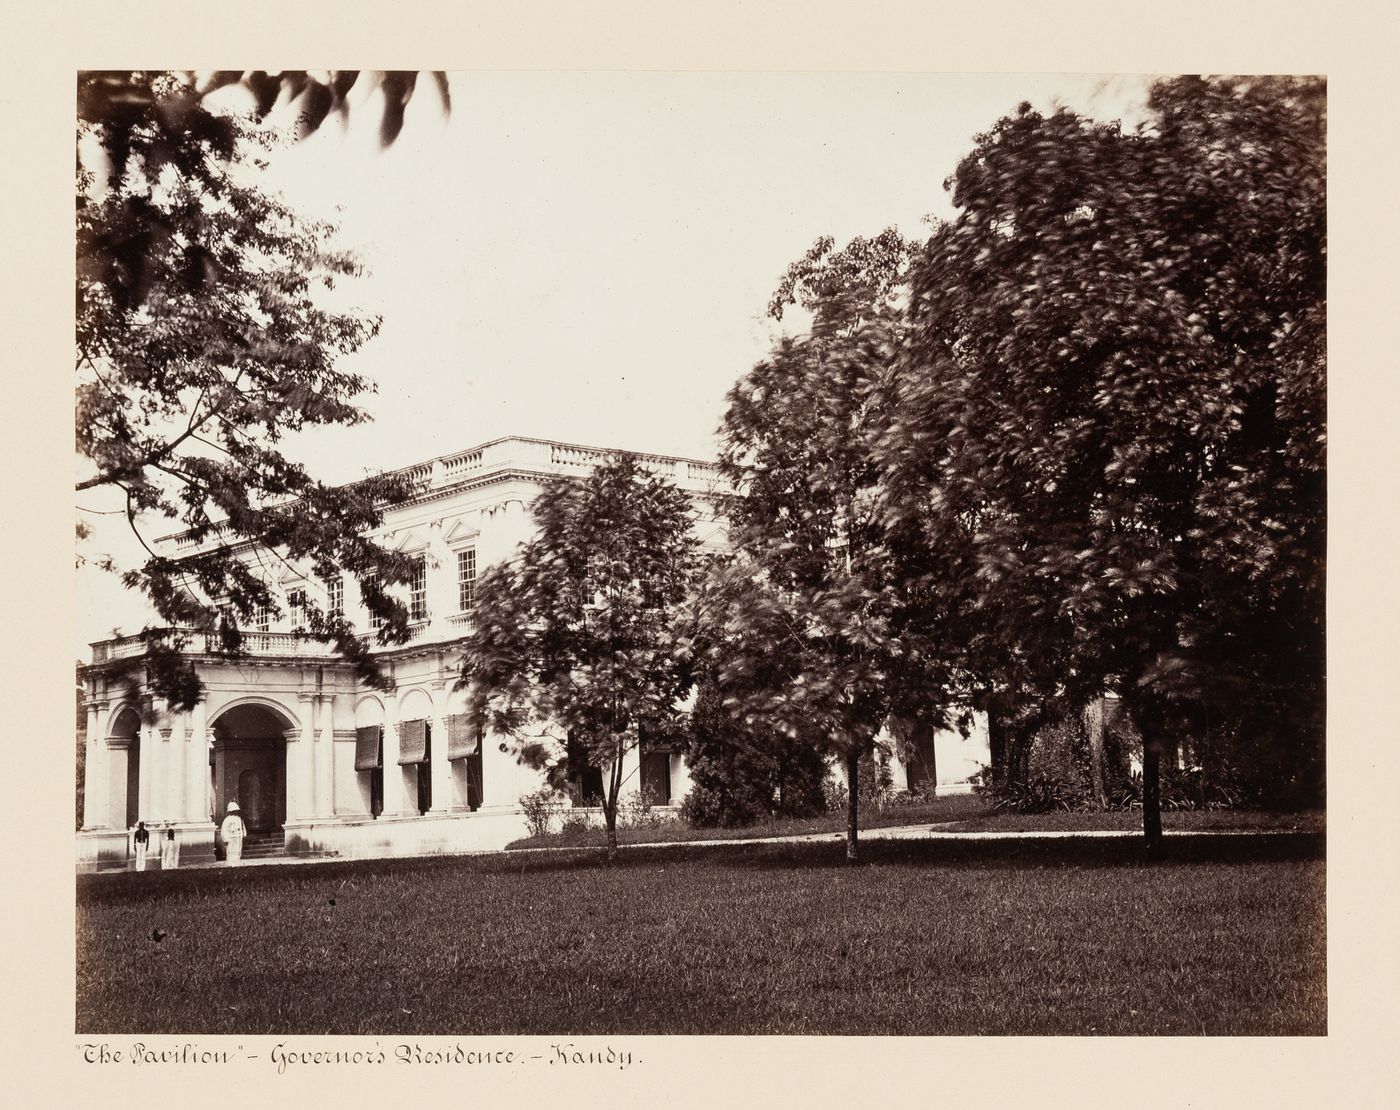 View of the Governor's Residence (also known as the Pavilion, the King's Pavilion or the Queen's Pavilion), Kandy, Ceylon (now Sri Lanka)